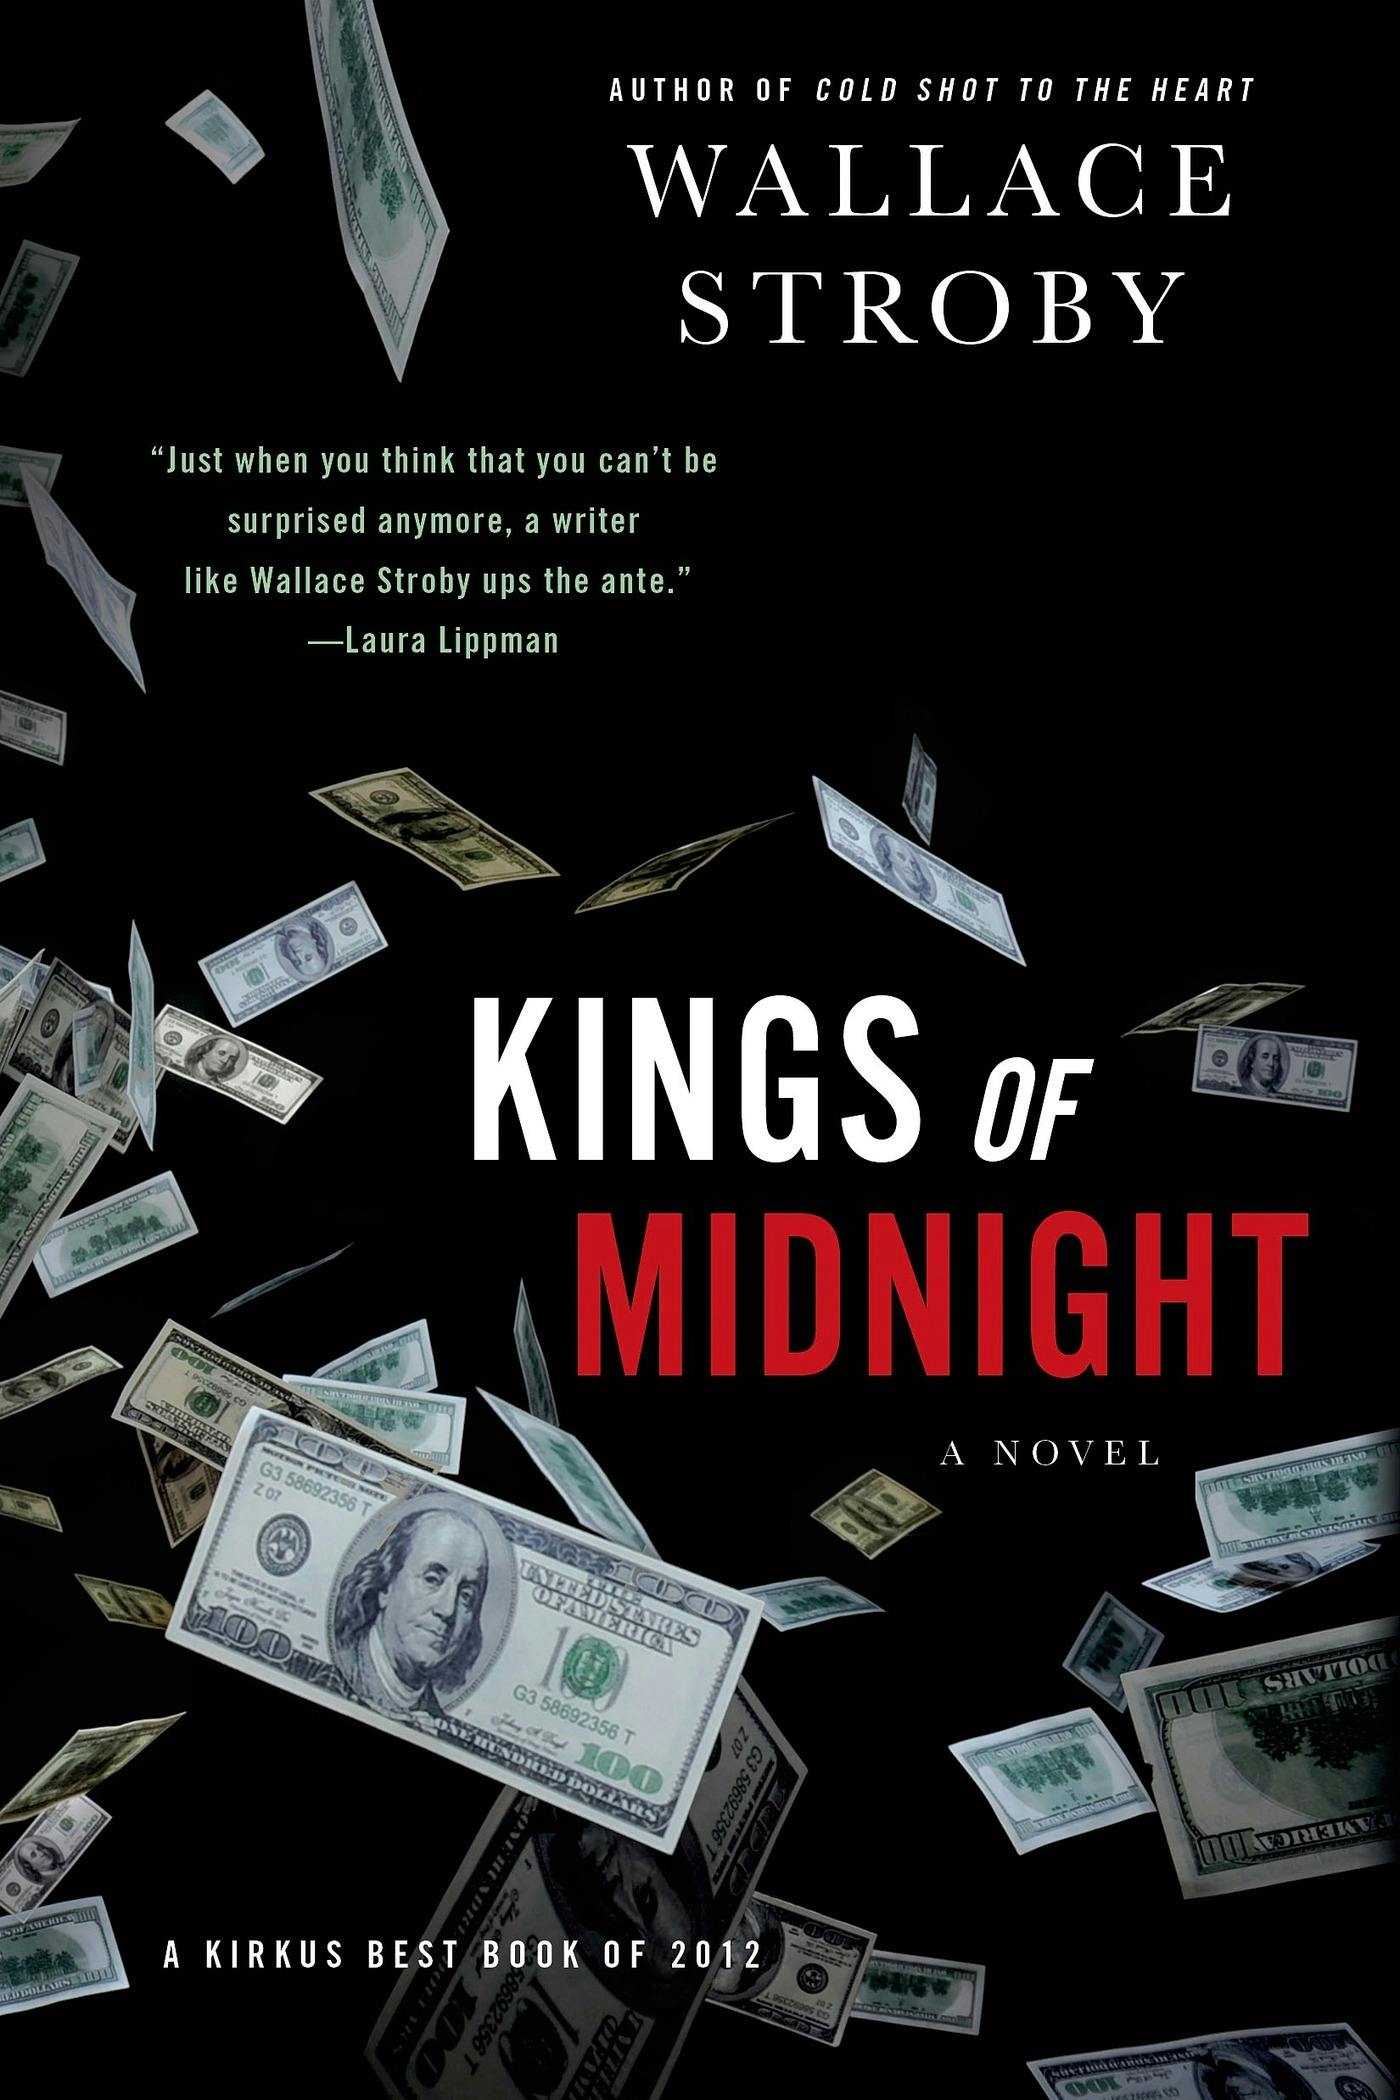 Image of Kings of Midnight